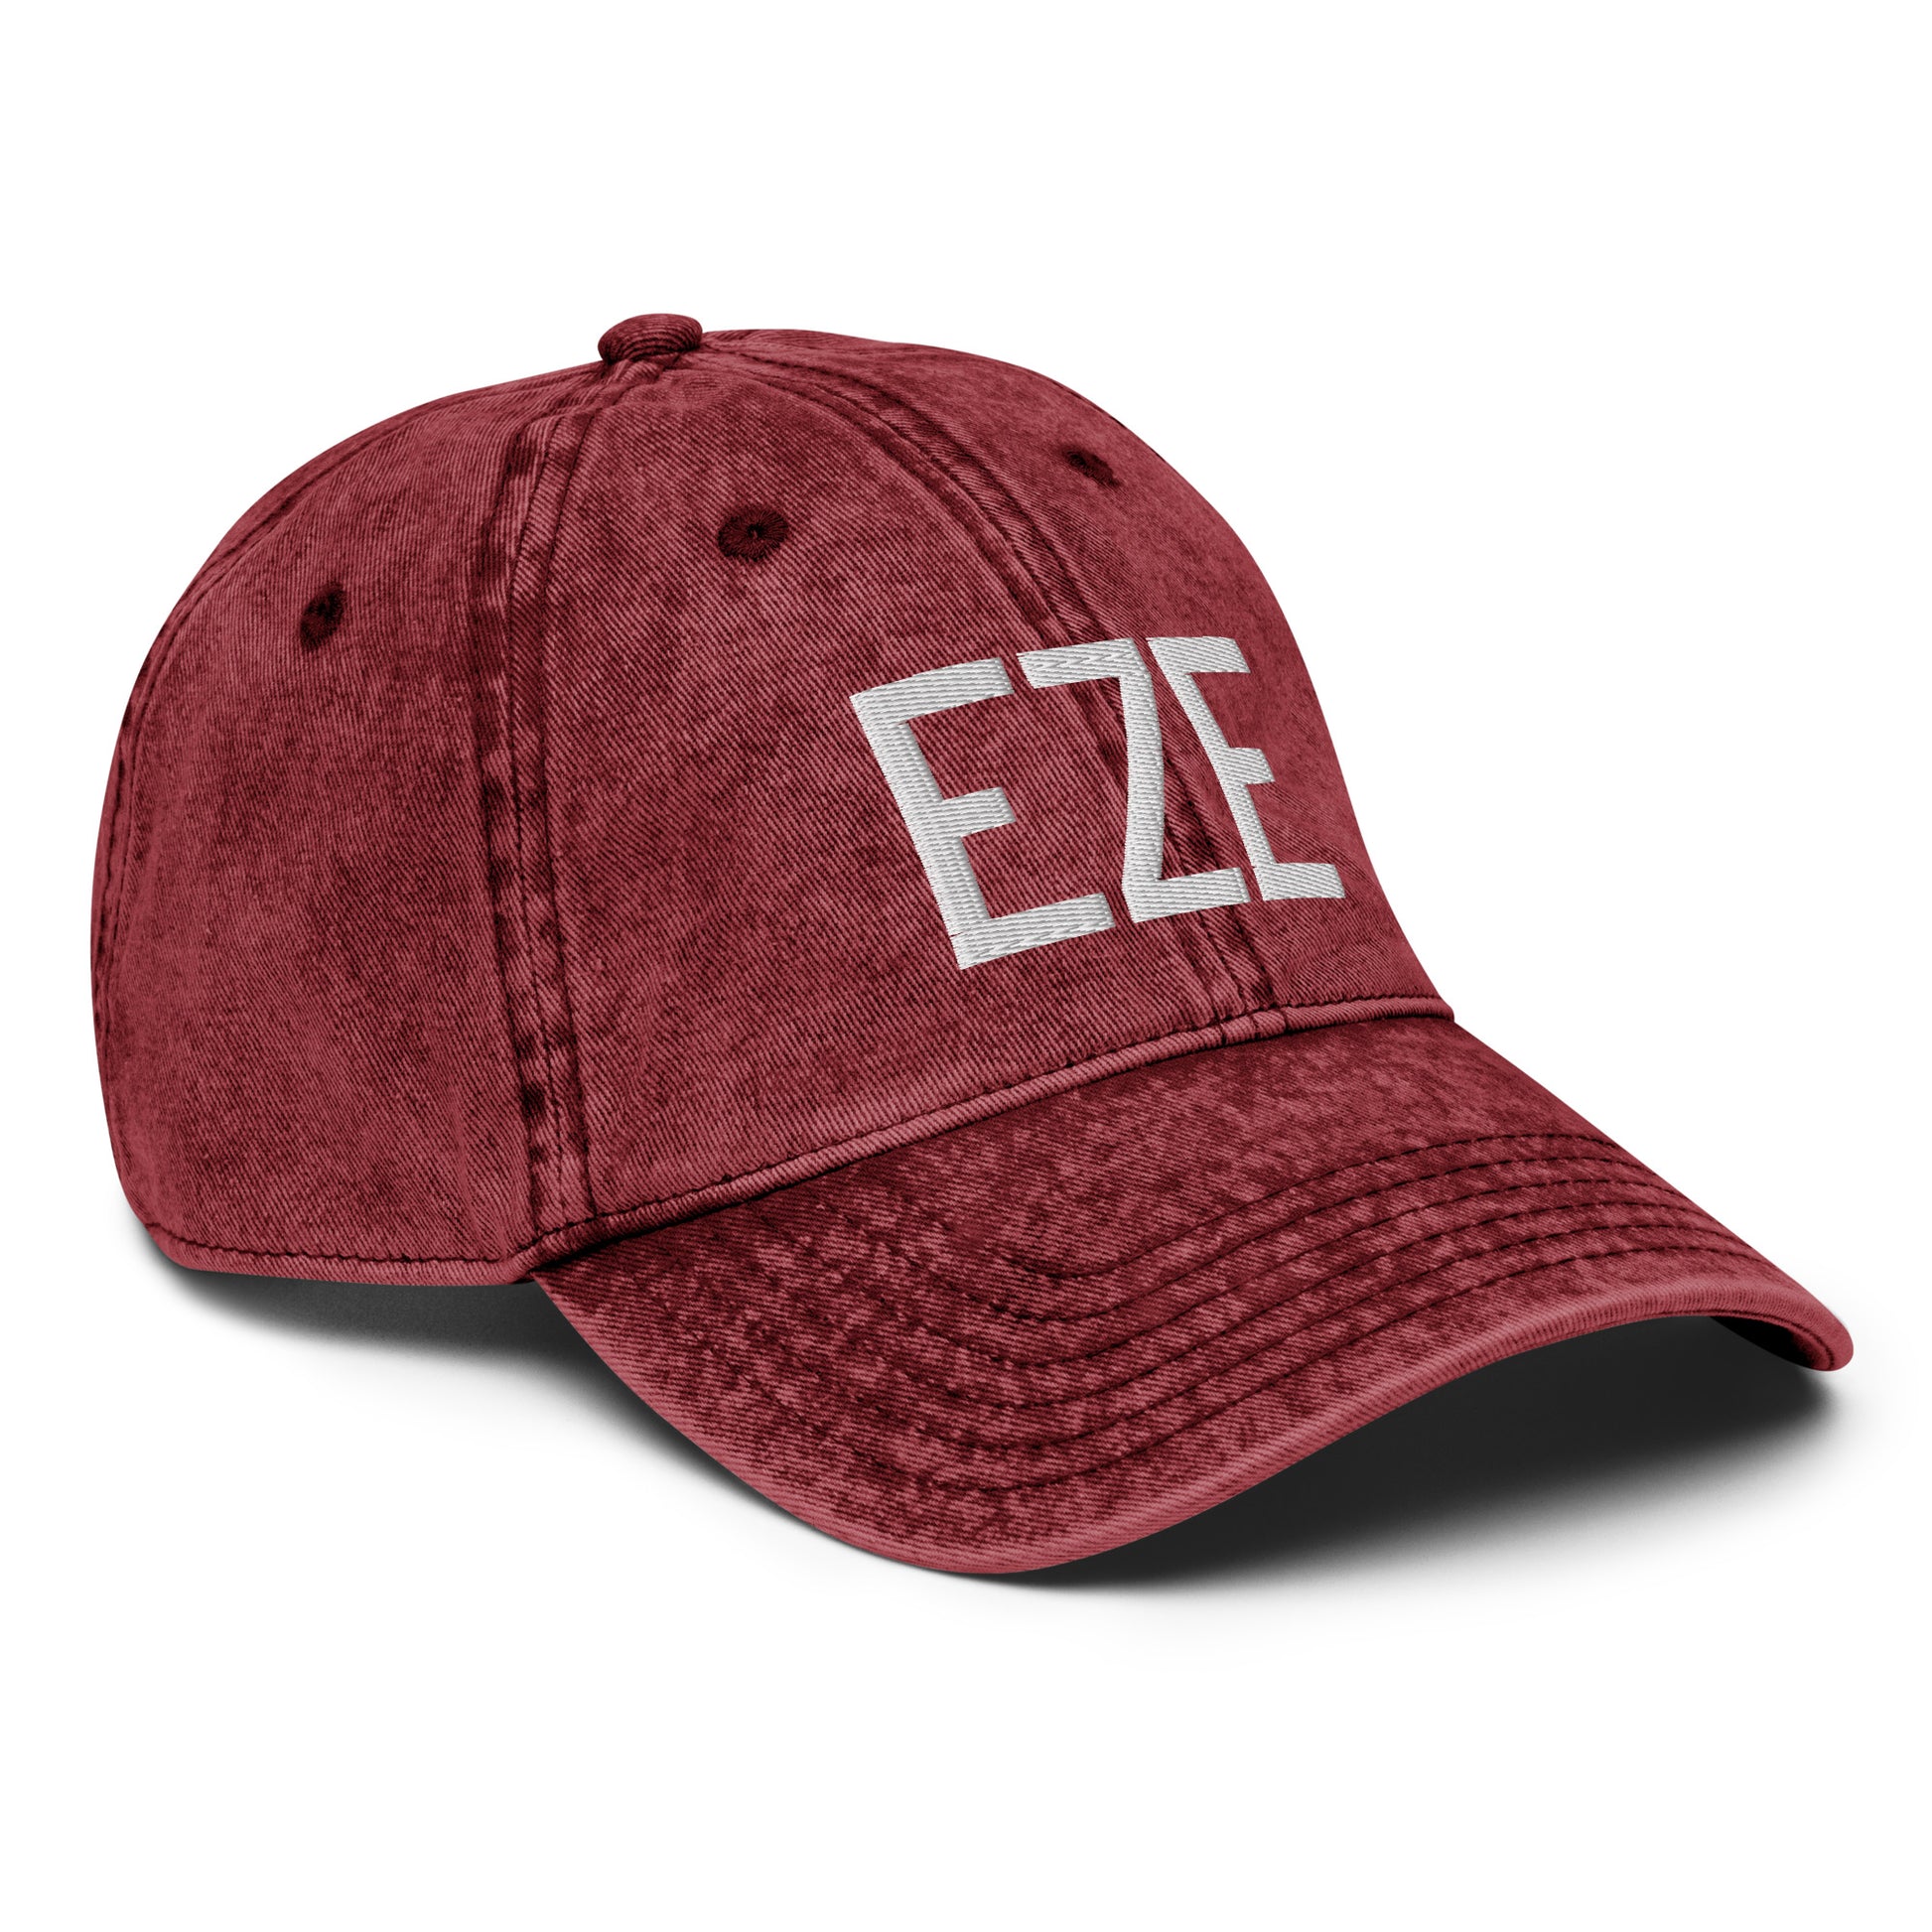 Airport Code Twill Cap - White • EZE Buenos Aires • YHM Designs - Image 21